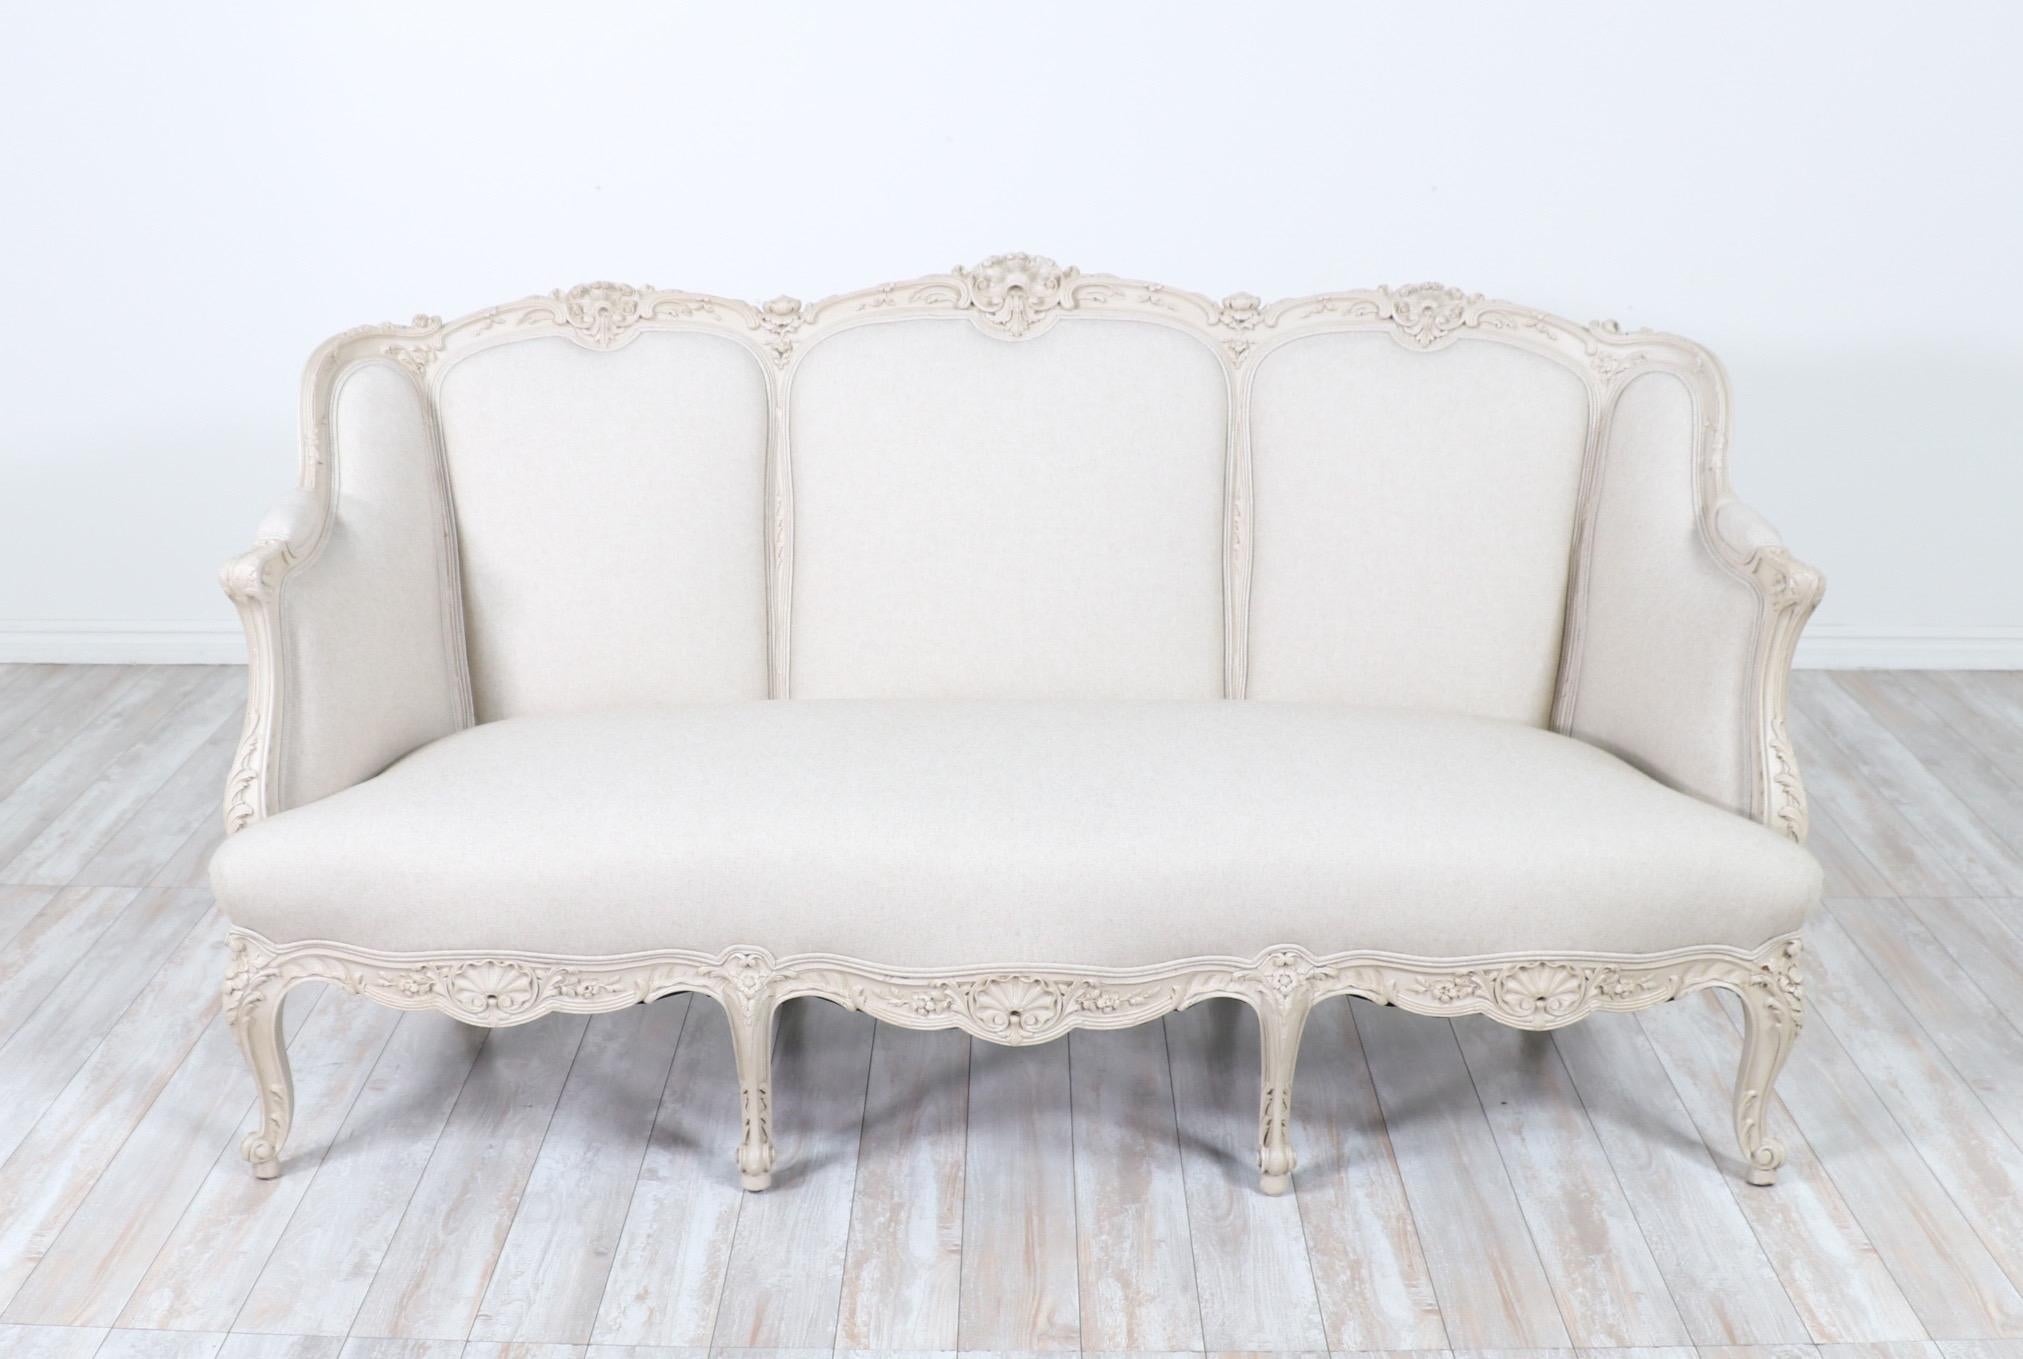 Exquisite, French 1920s Louis XV-style carved settee.

The settee features a beautifully carved wood frame with a fresh coat of greige paint and a light coat of antiquing glaze to bring out the delicate carvings. New cotton linen canvas upholstery.